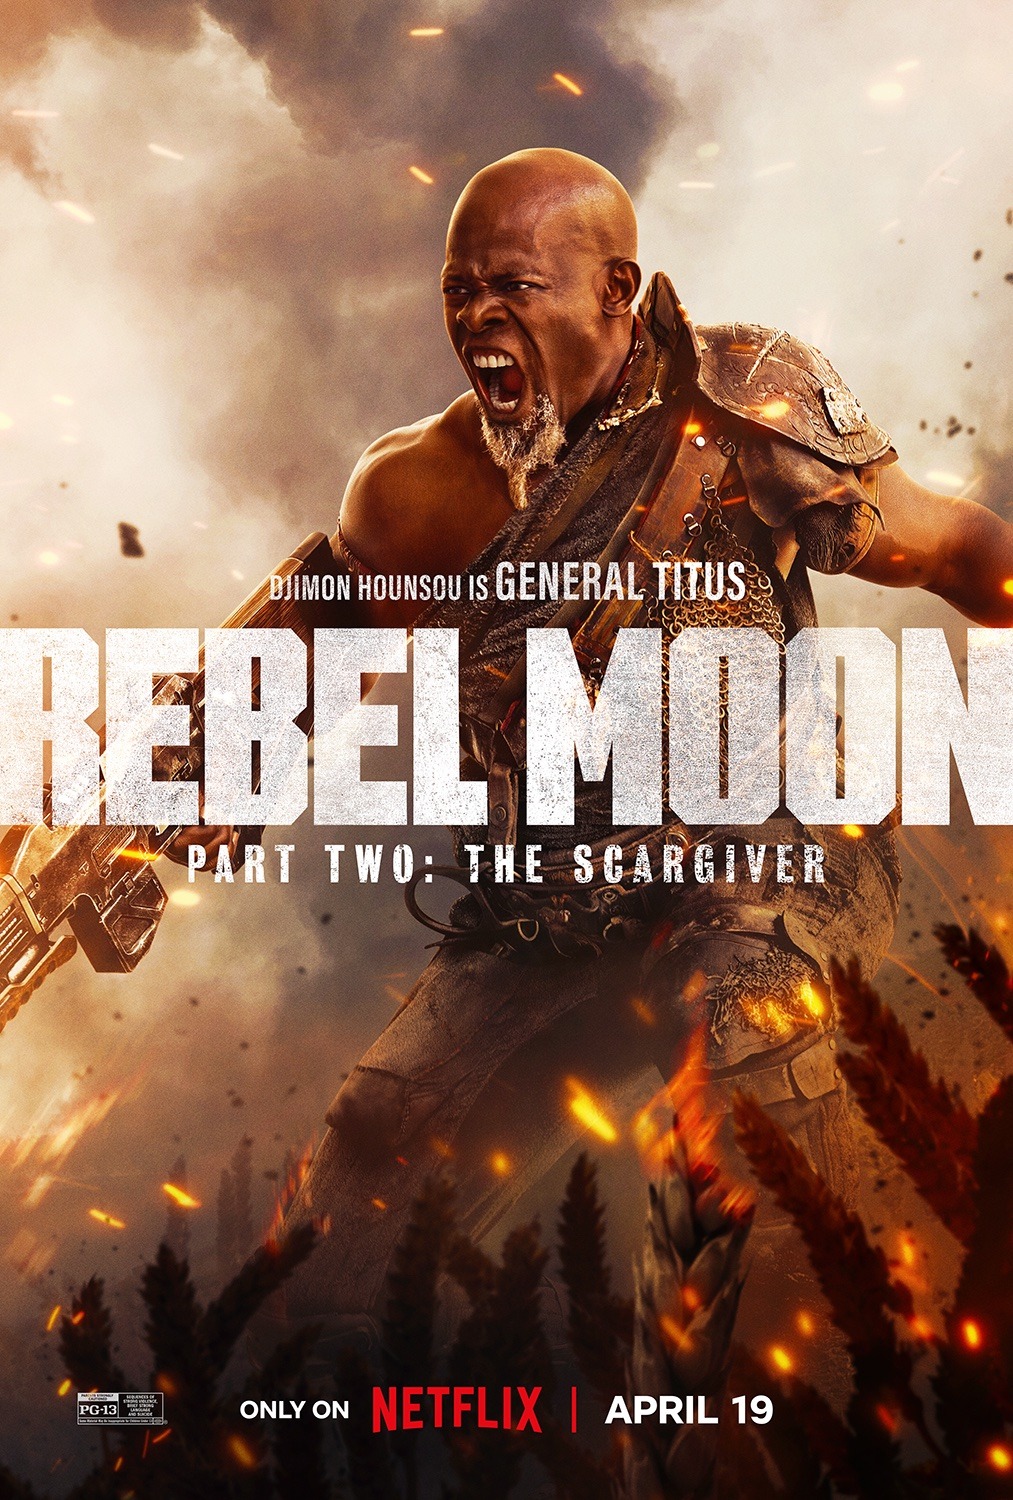 Extra Large Movie Poster Image for Rebel Moon - Part Two: The Scargiver (#4 of 11)